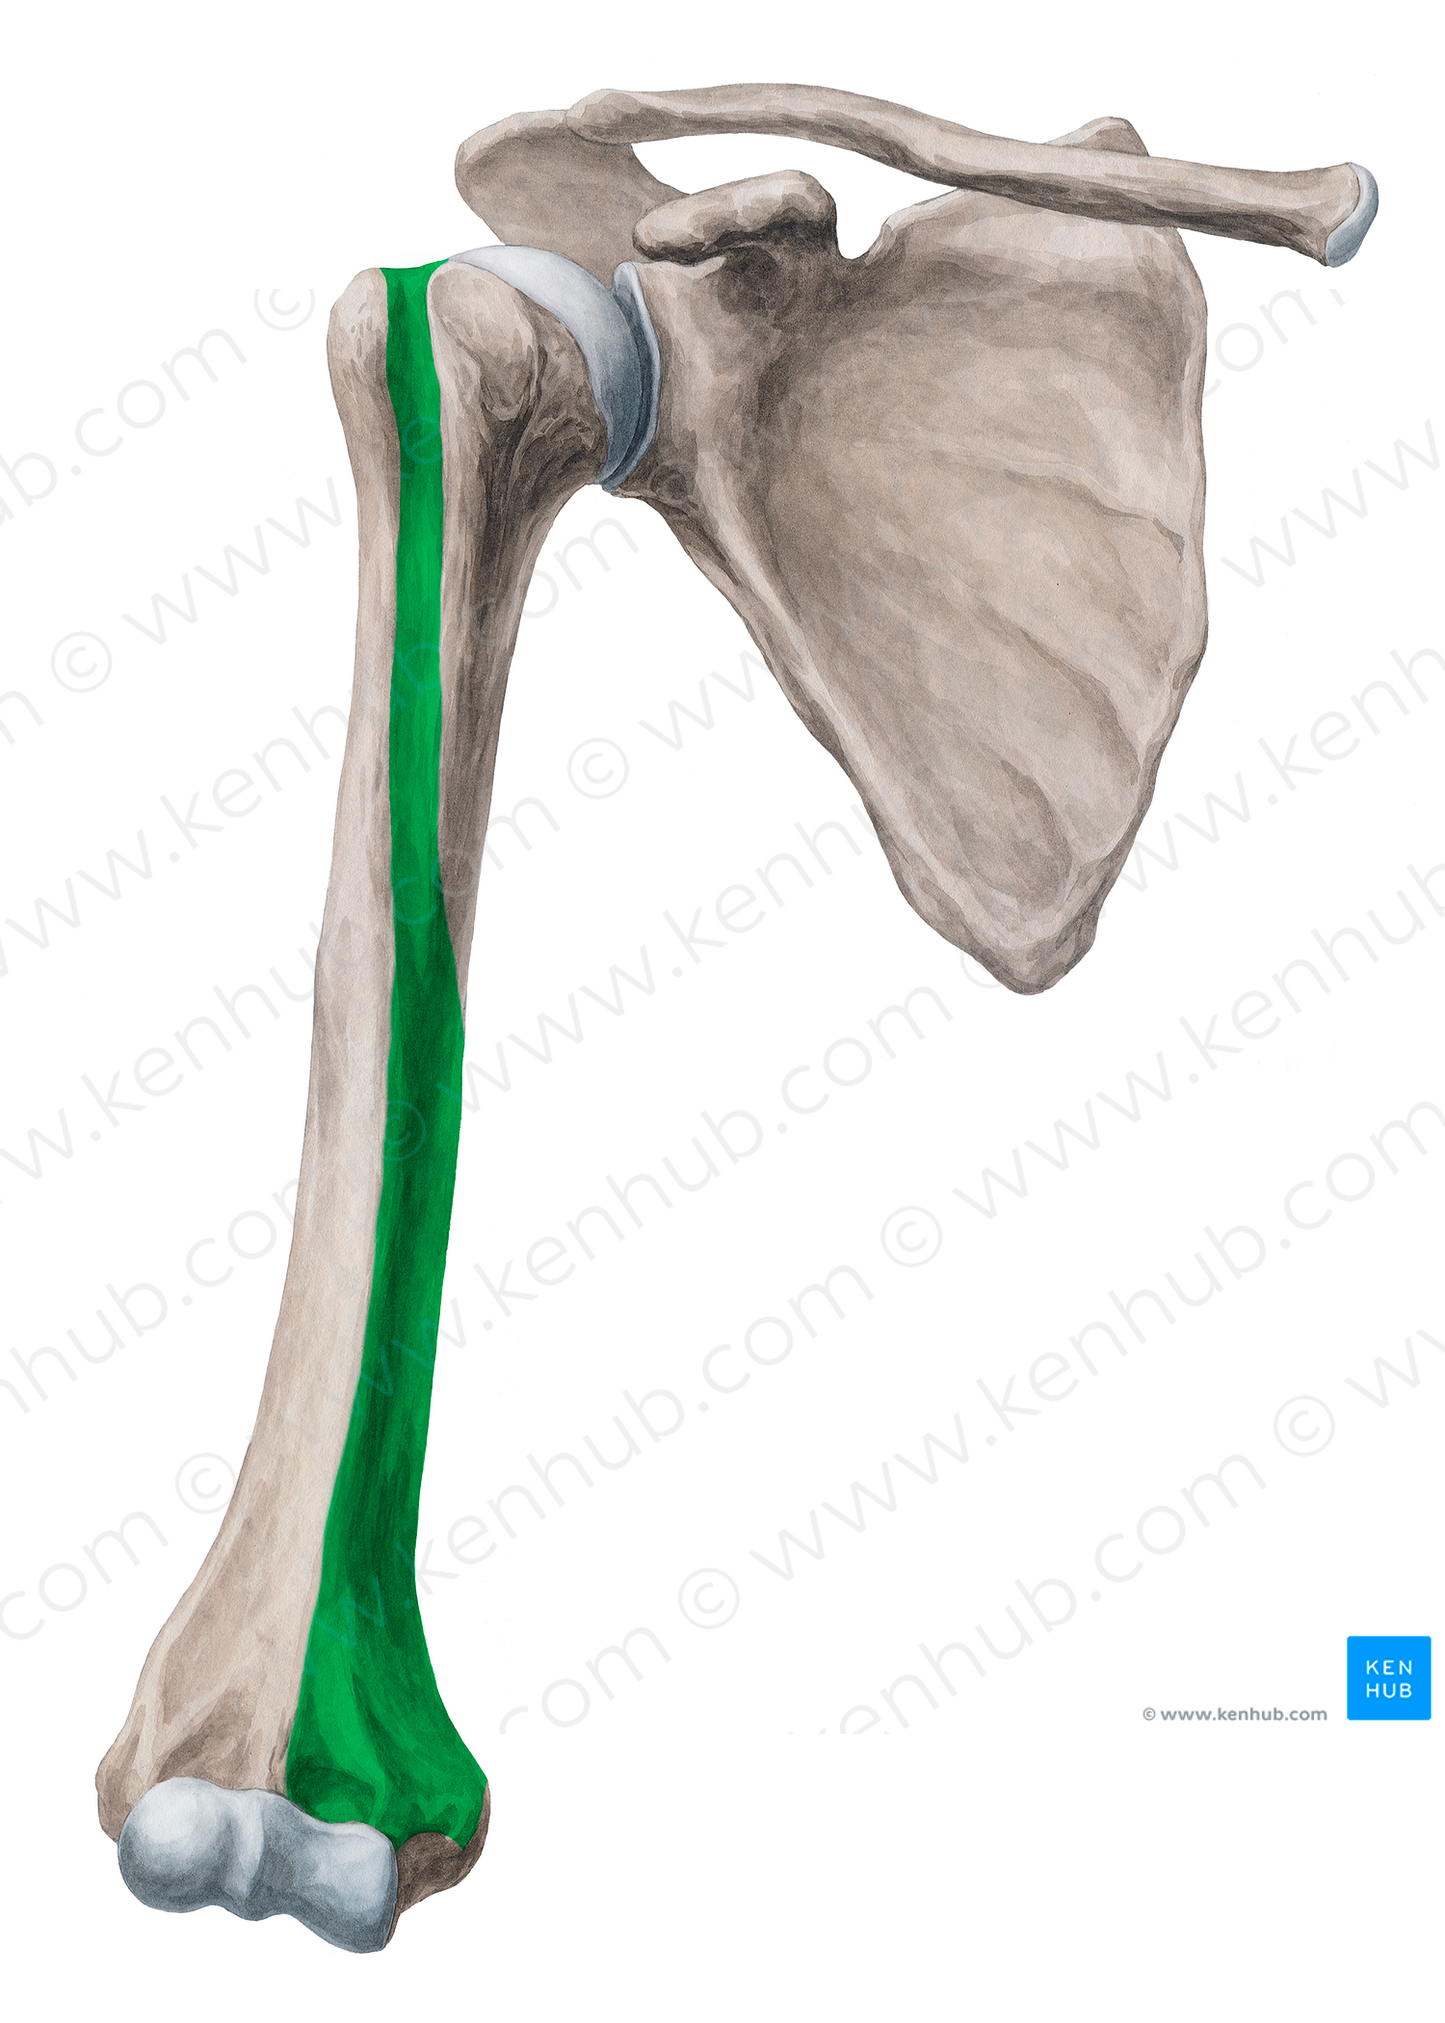 Anteromedial surface of humerus (#19935)